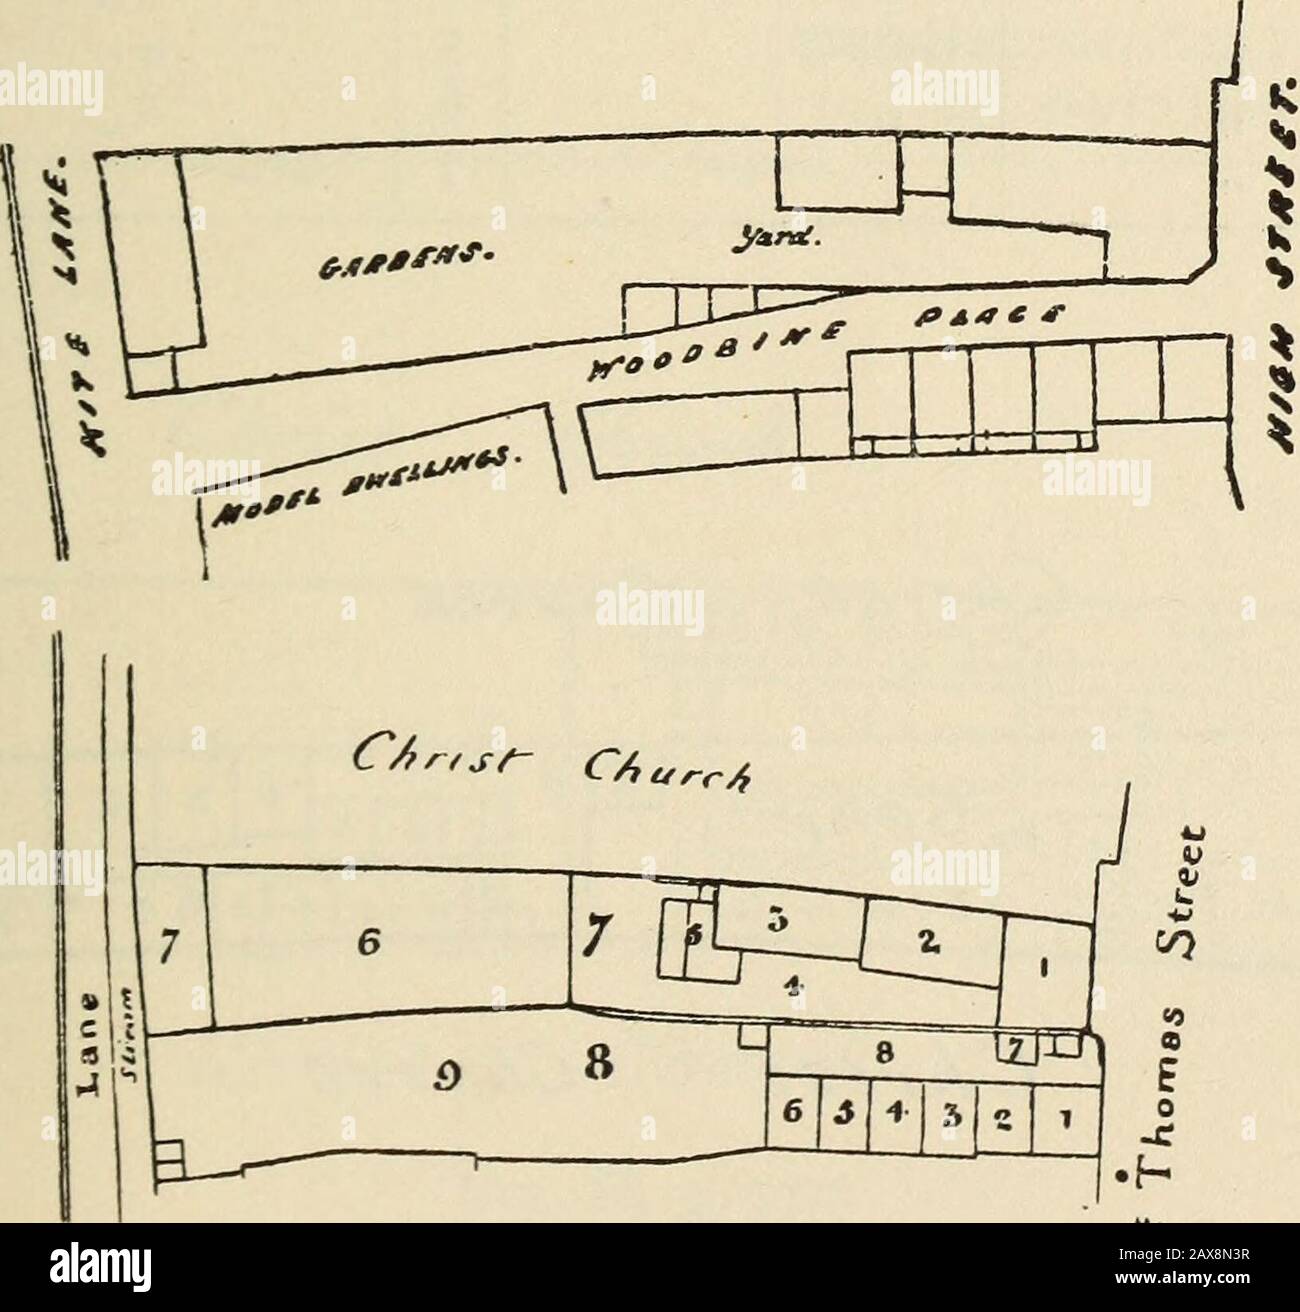 Publications . Vol. 0 pp.515- 26] TENEMENTS OF CHRIST CHURCH, 1829St. Thomas (High Street, South Side). 611 Lessee. John Pinfold Arthur Hughes Occupier. Peter MossWilliam TaylorPeter Moss Moss & Taylor Mrs. JakemanRalph DayWilliam HouseThomas HiggsJames StroudleyHenry Jaggers James Maltby DescHption. Dwelling-house Bacon-house Yard Pigsties Garden Shed Dwelling-house Wash-houseYard, &c.Garden Quantity.A. R. P. o o 33to o o 31A Also plan for new buildings.. Christ Chixrc/* Vol. n, pp. 513-5. R r 2 6l2 TENEMENTS OF CHRIST CHURCH, 1829 St. Thomas (High Street, South Side). ^•?&lt;e f^i Lessee. Oc Stock Photo